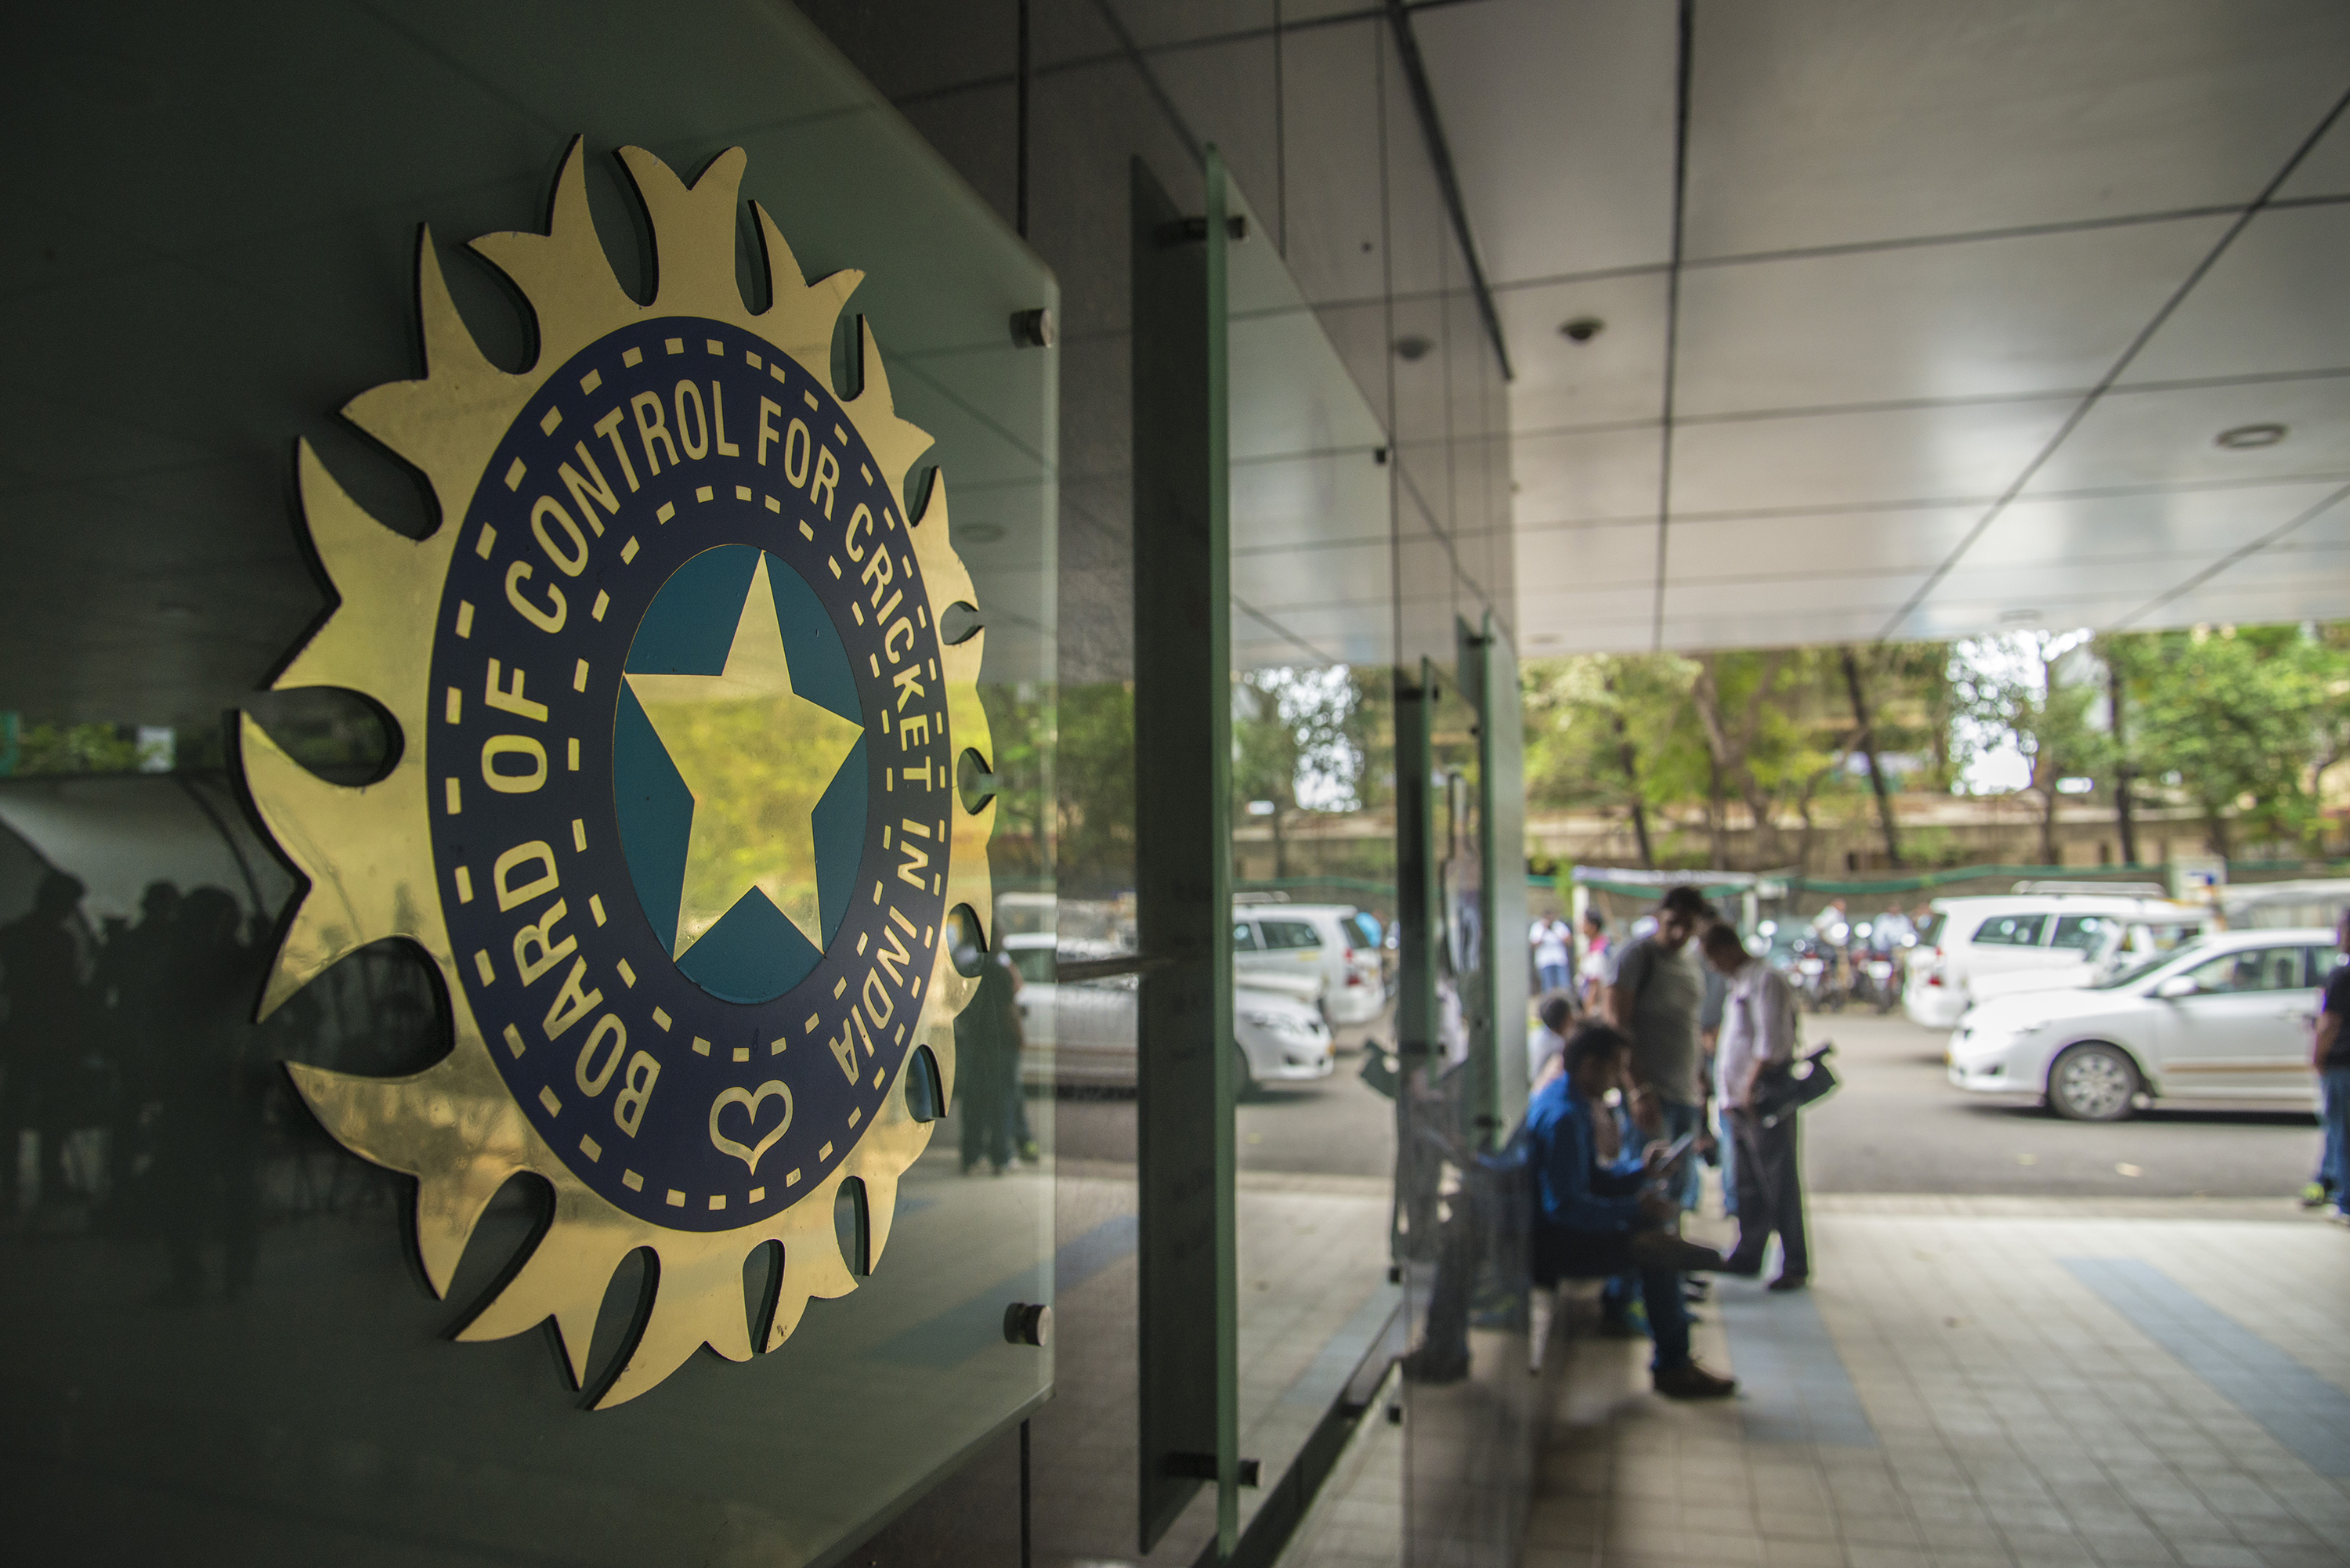 Lodha panel members criticize BCCI’s move to amend major clauses in constitution